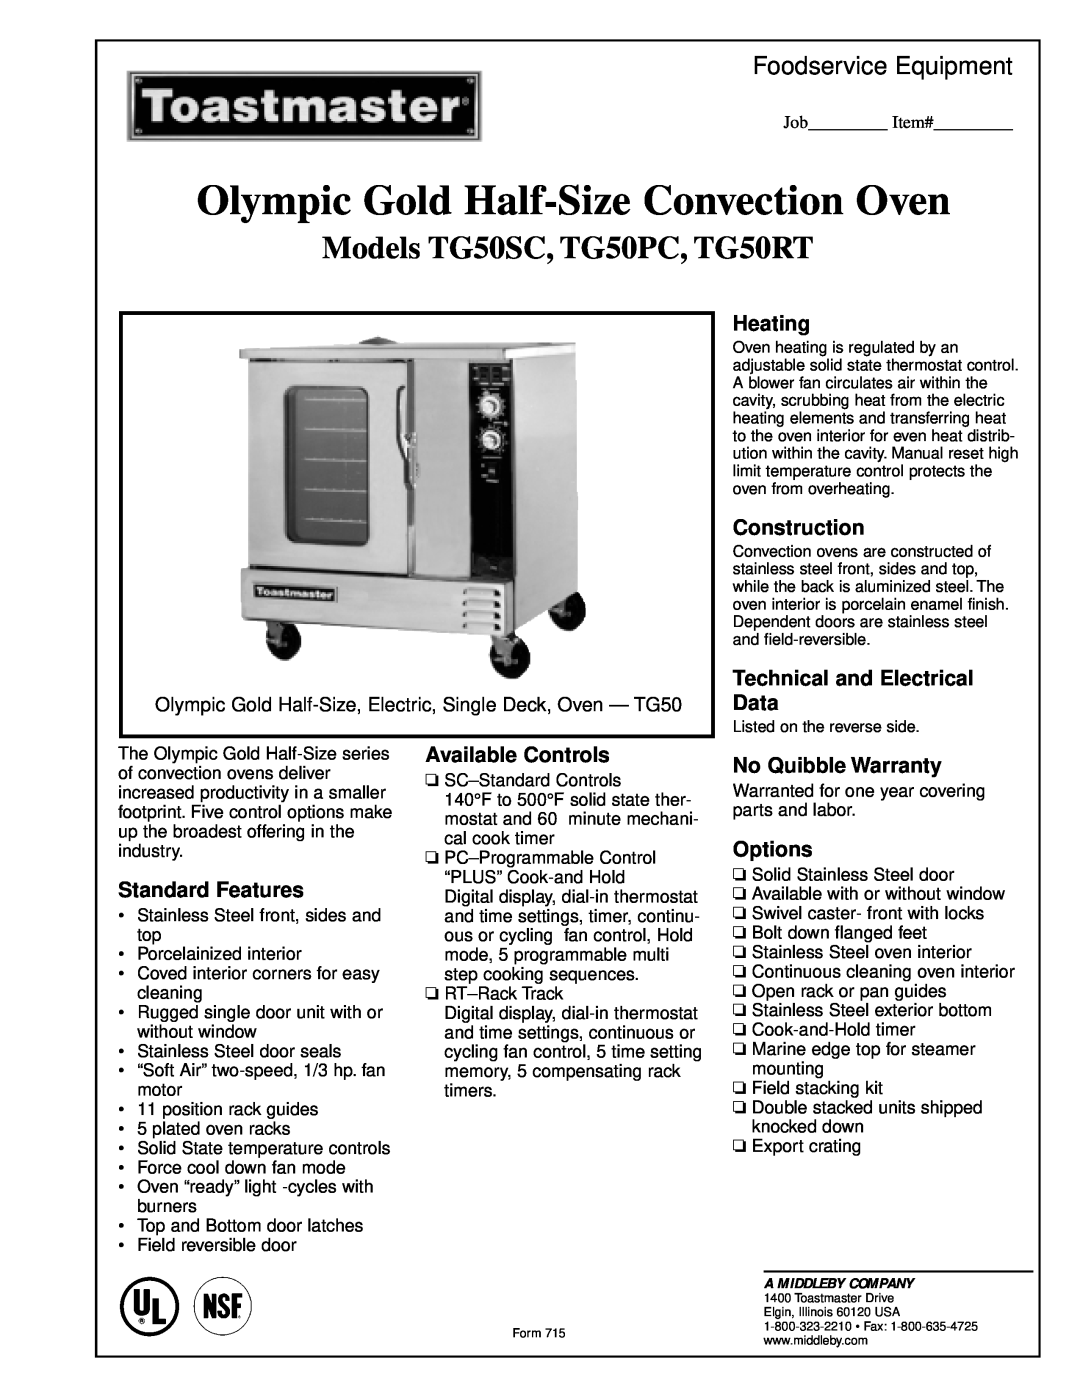 Toastmaster warranty Models TG50SC, TG50PC, TG50RT, Olympic Gold Half-SizeConvection Oven, Foodservice Equipment 